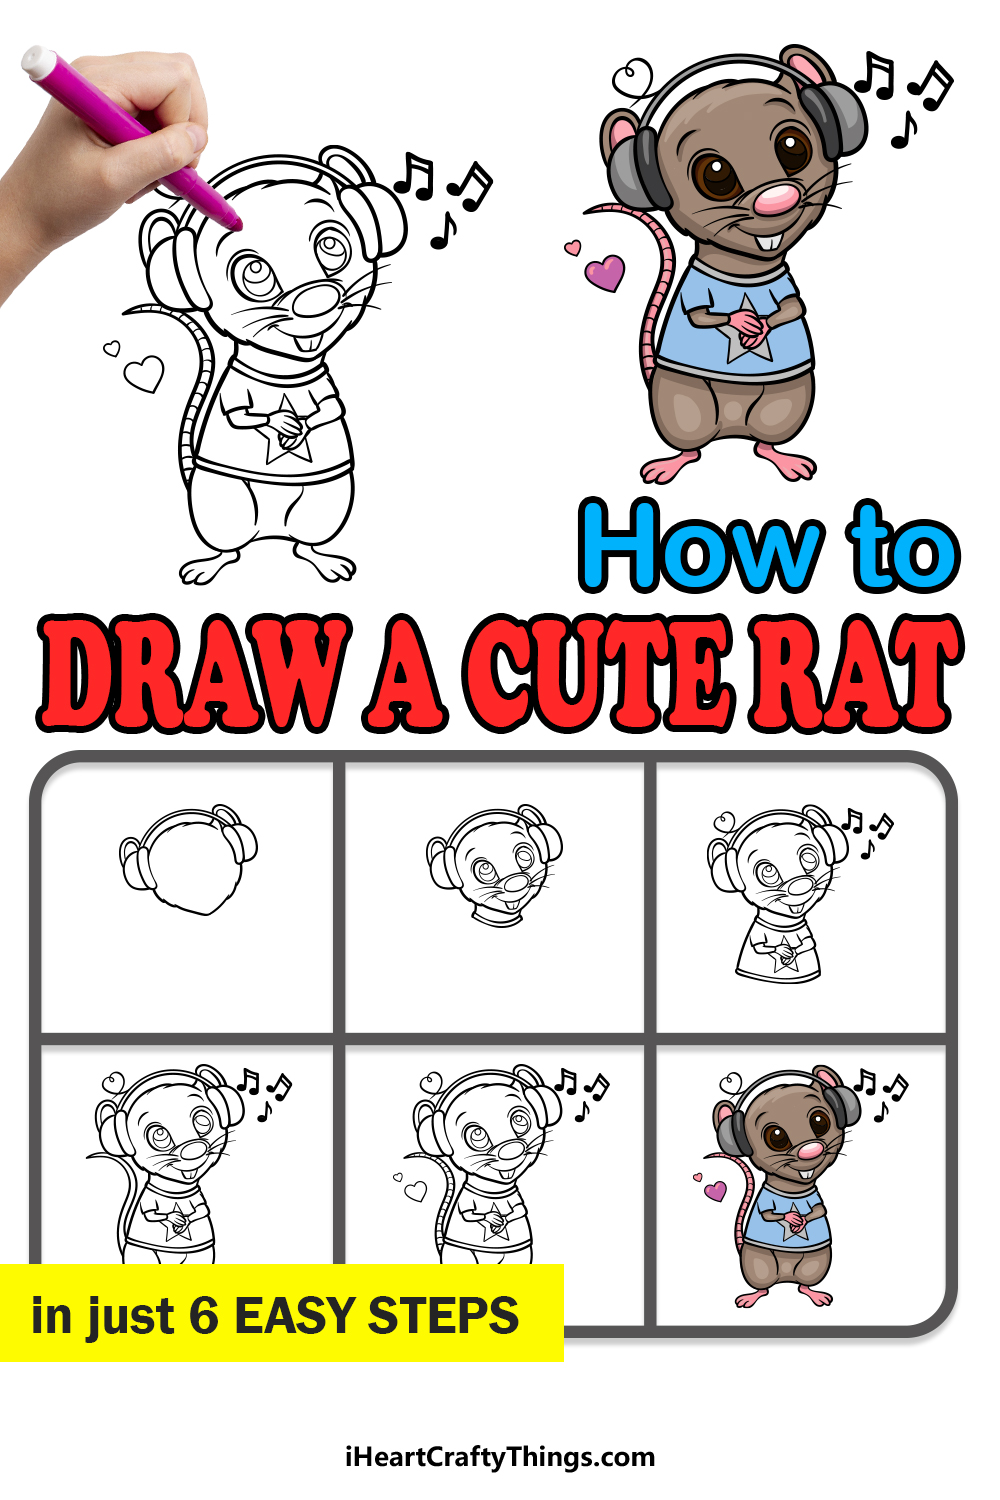 how to draw a Cute Rat in 6 easy steps